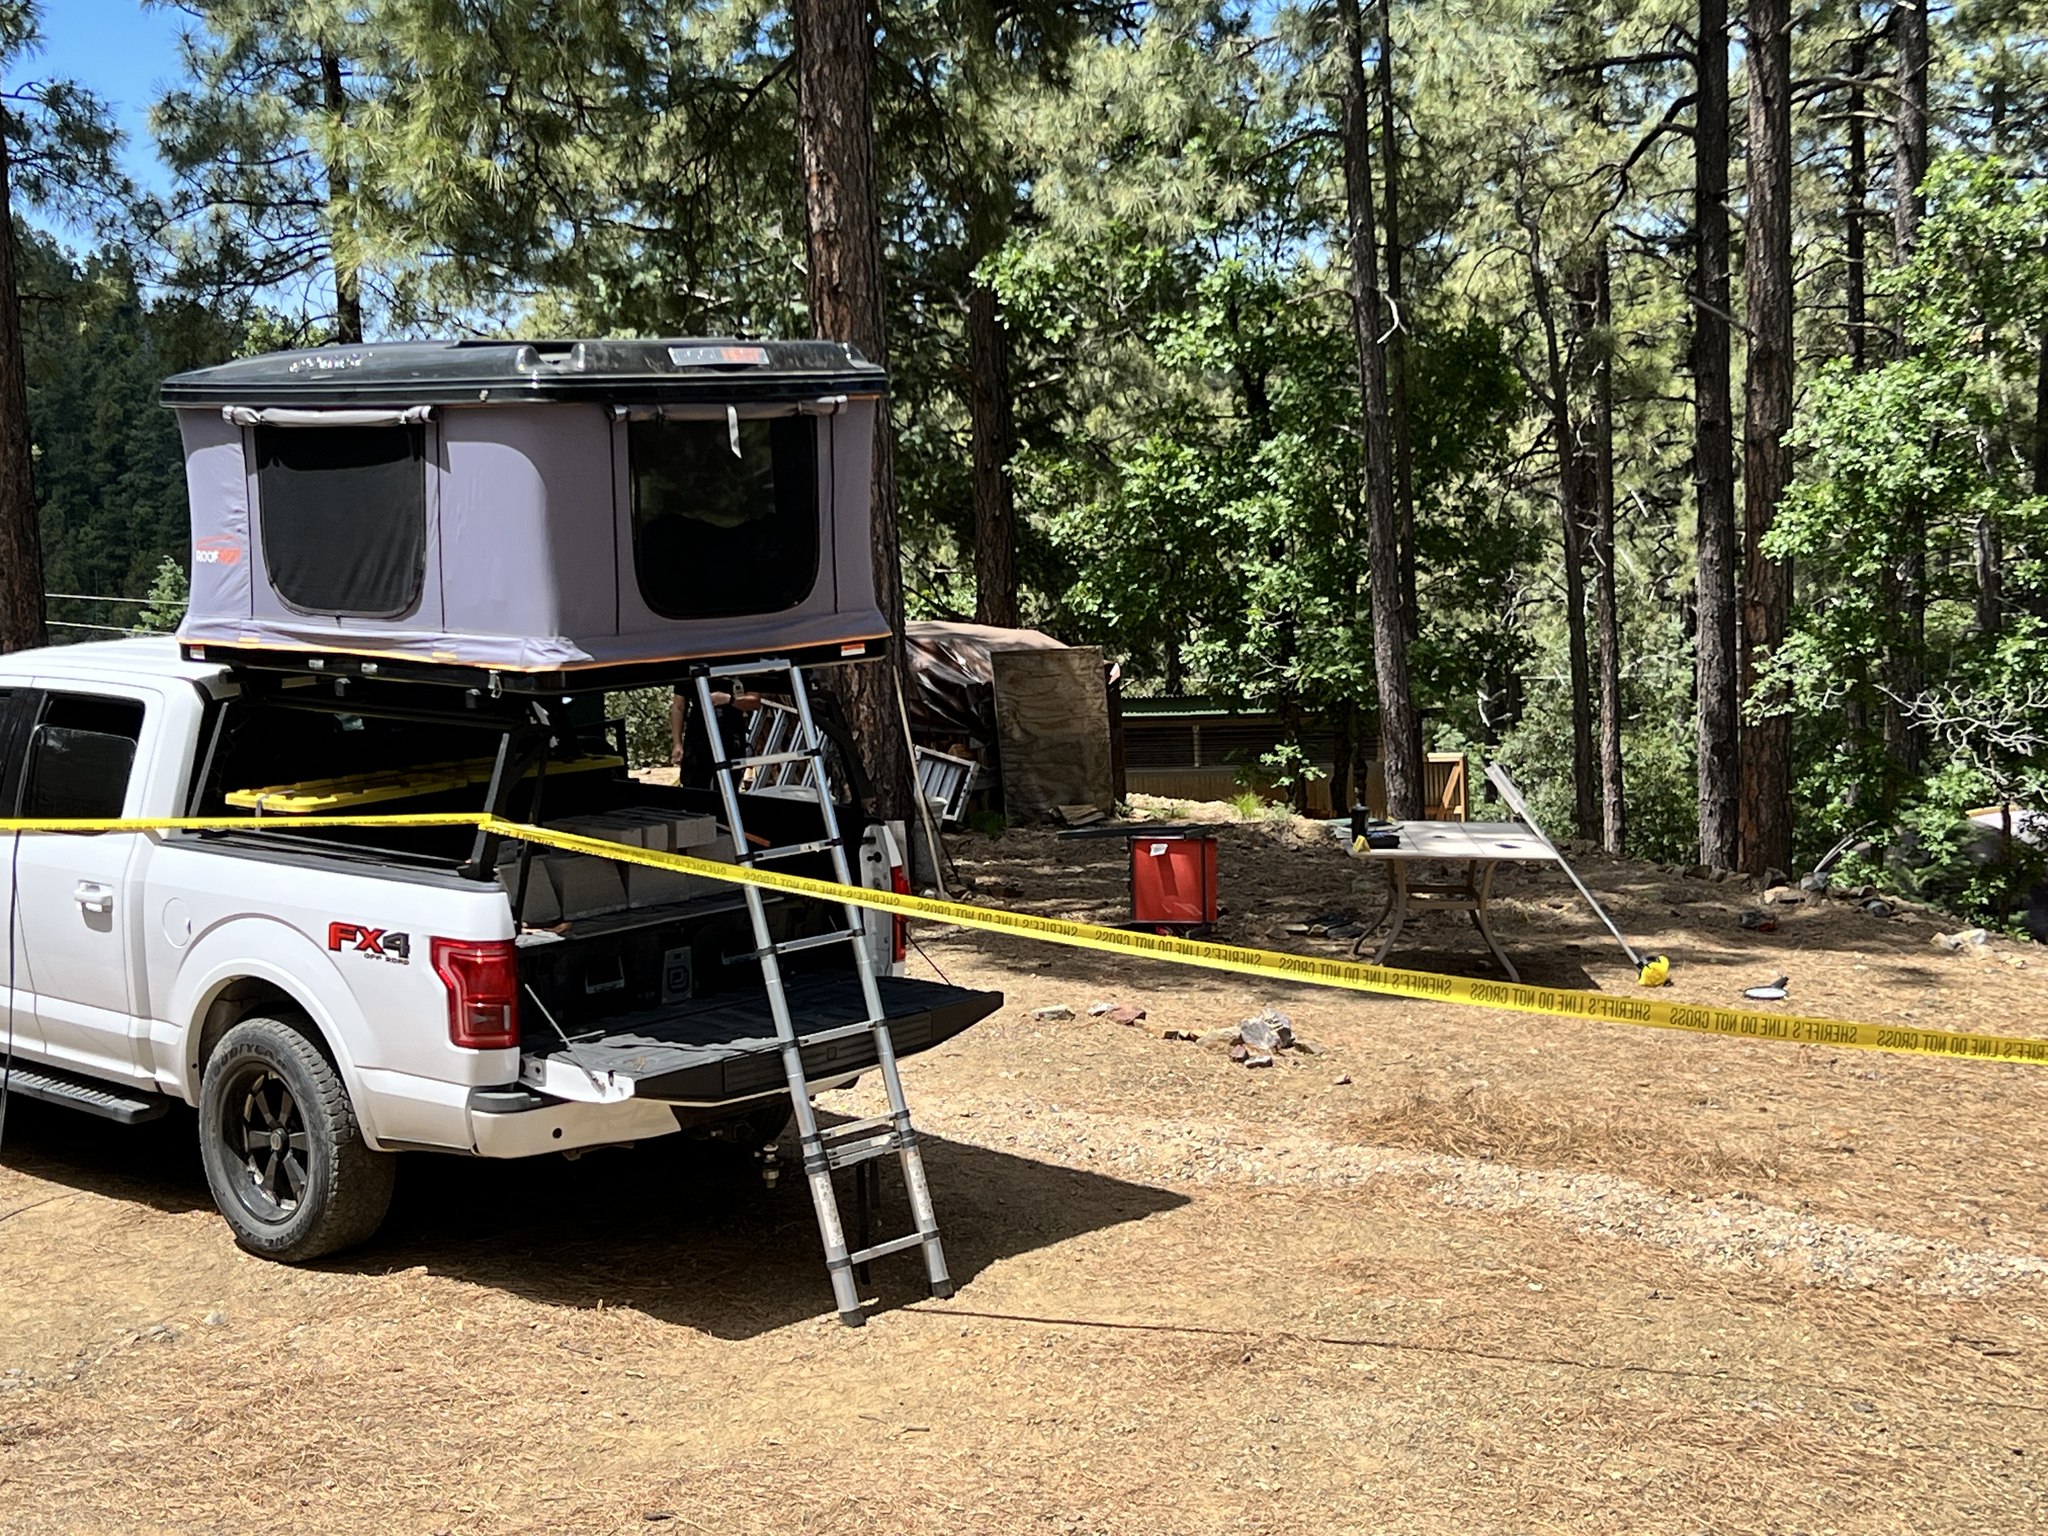 The campsite where an Arizona man was fatally attacked.